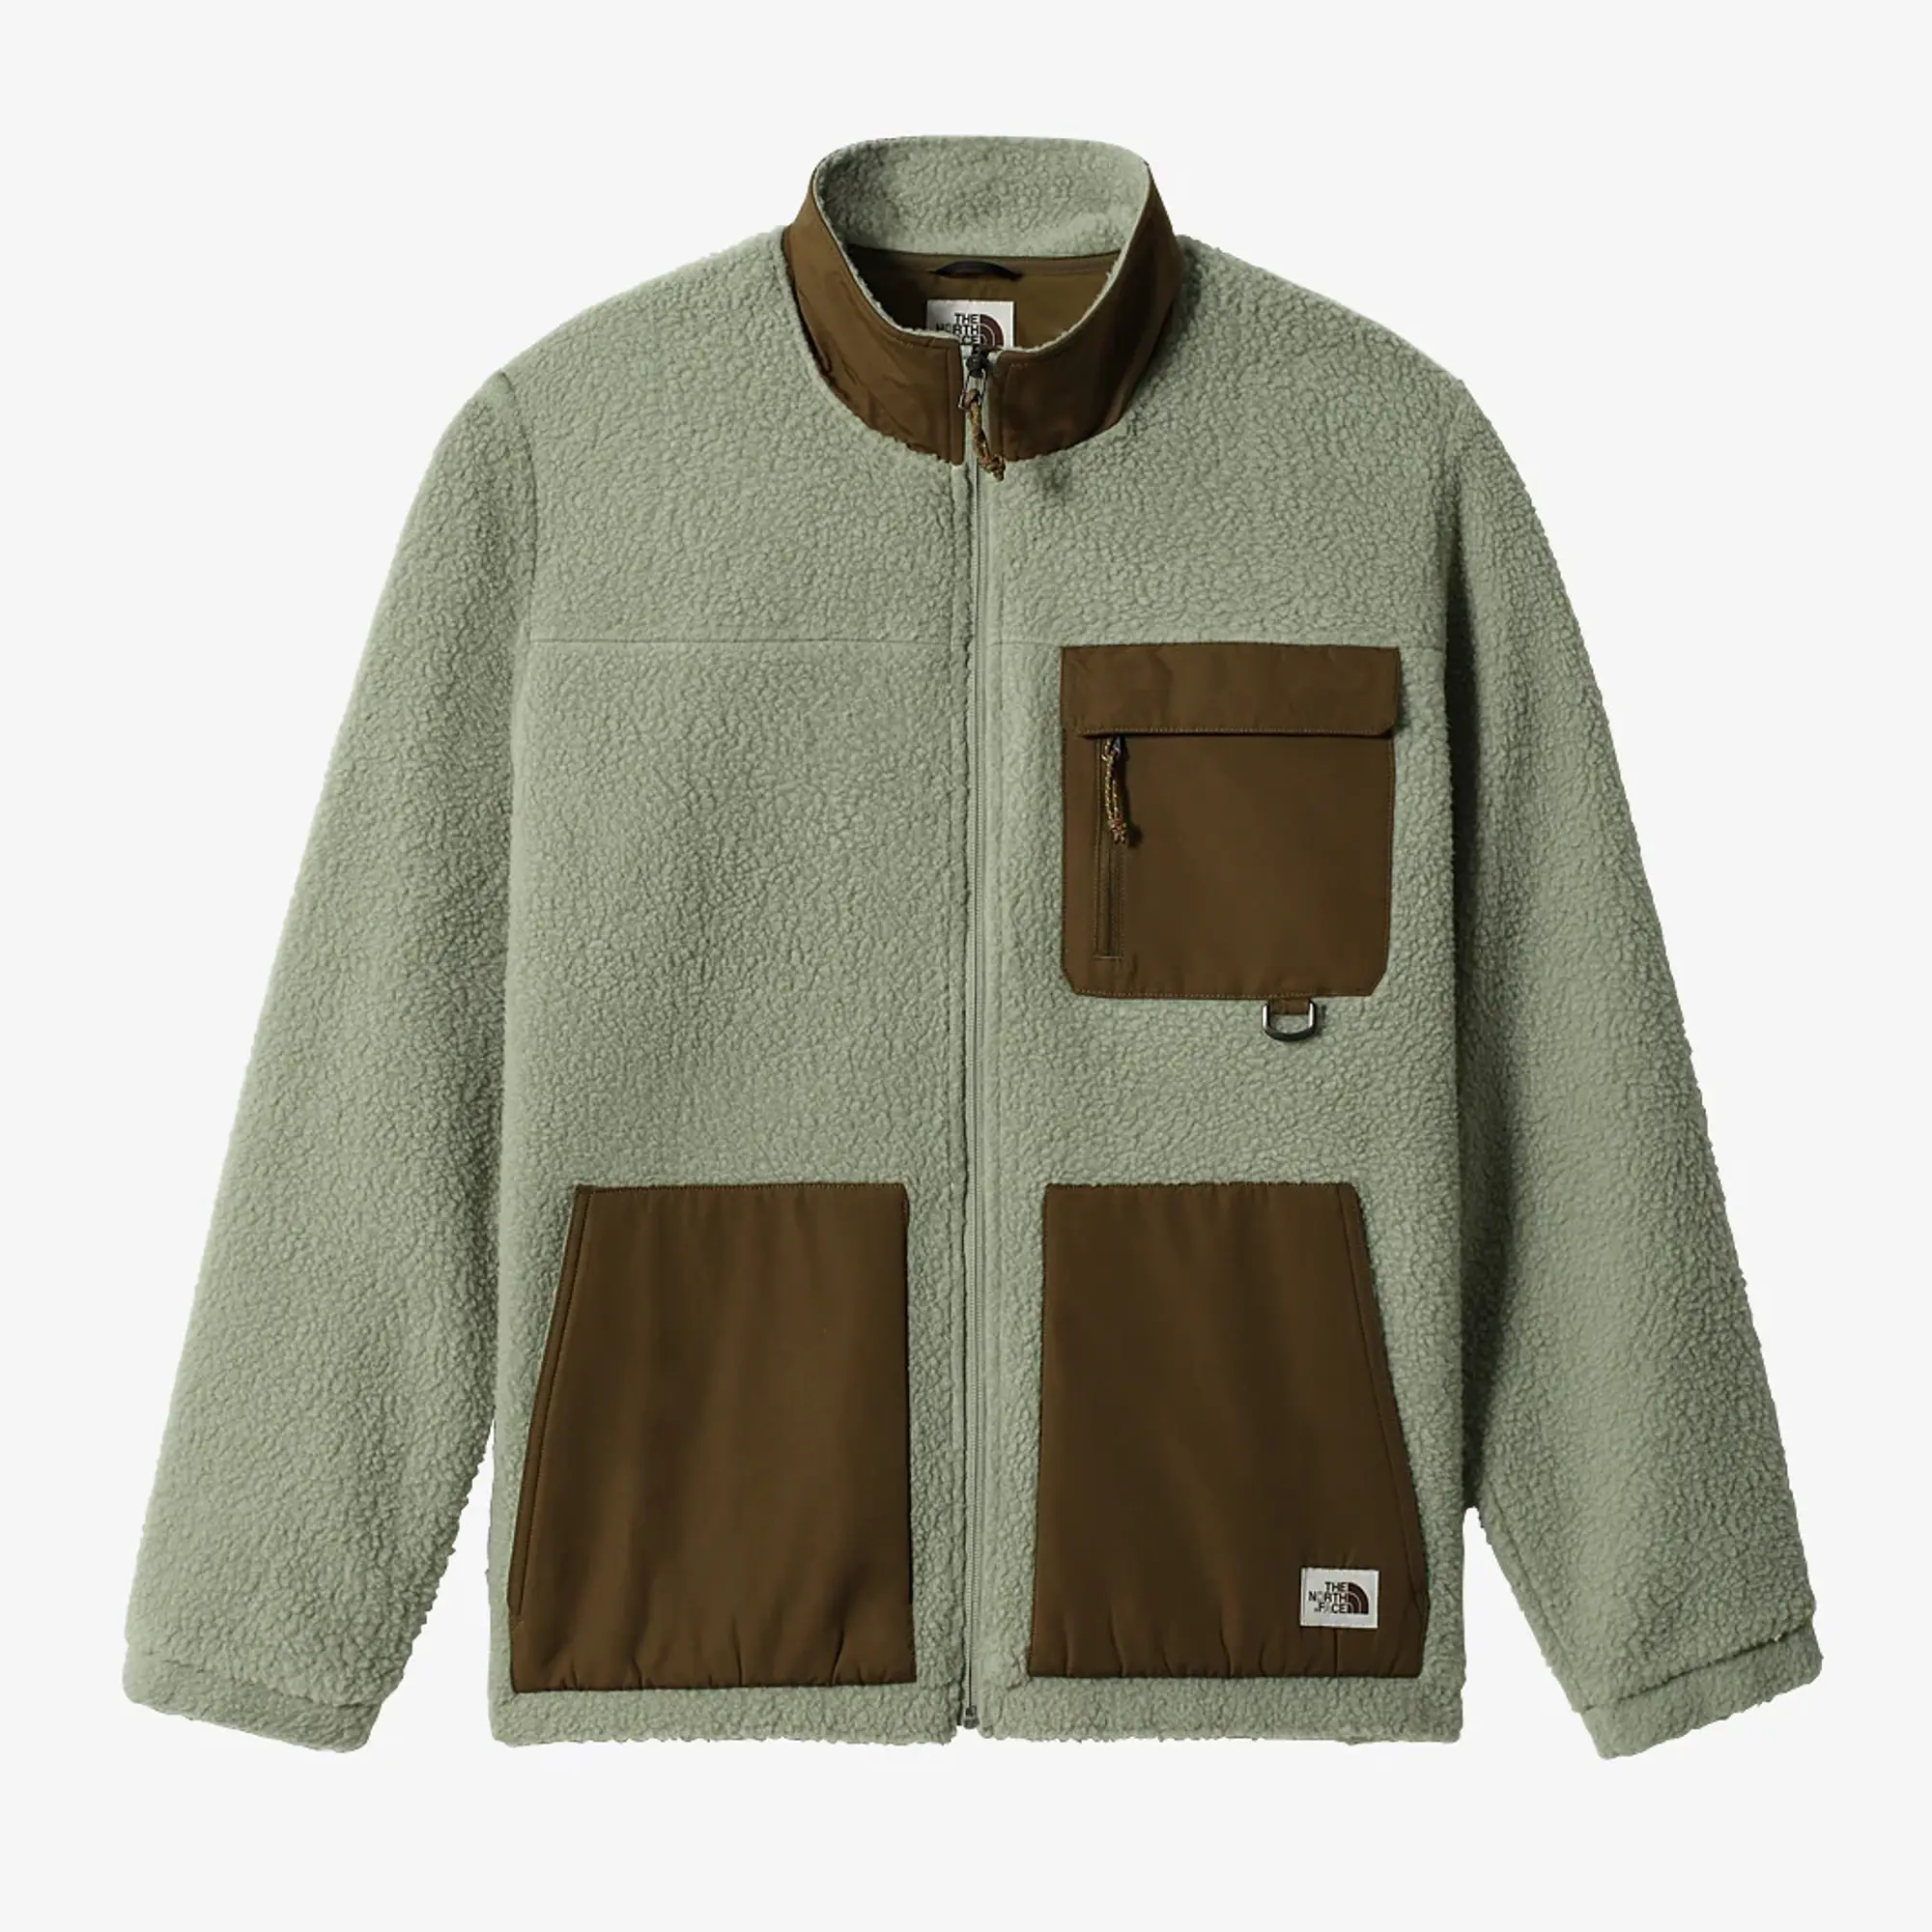 The North Face Bleaklow Fleece - Tea Green / Military Olive